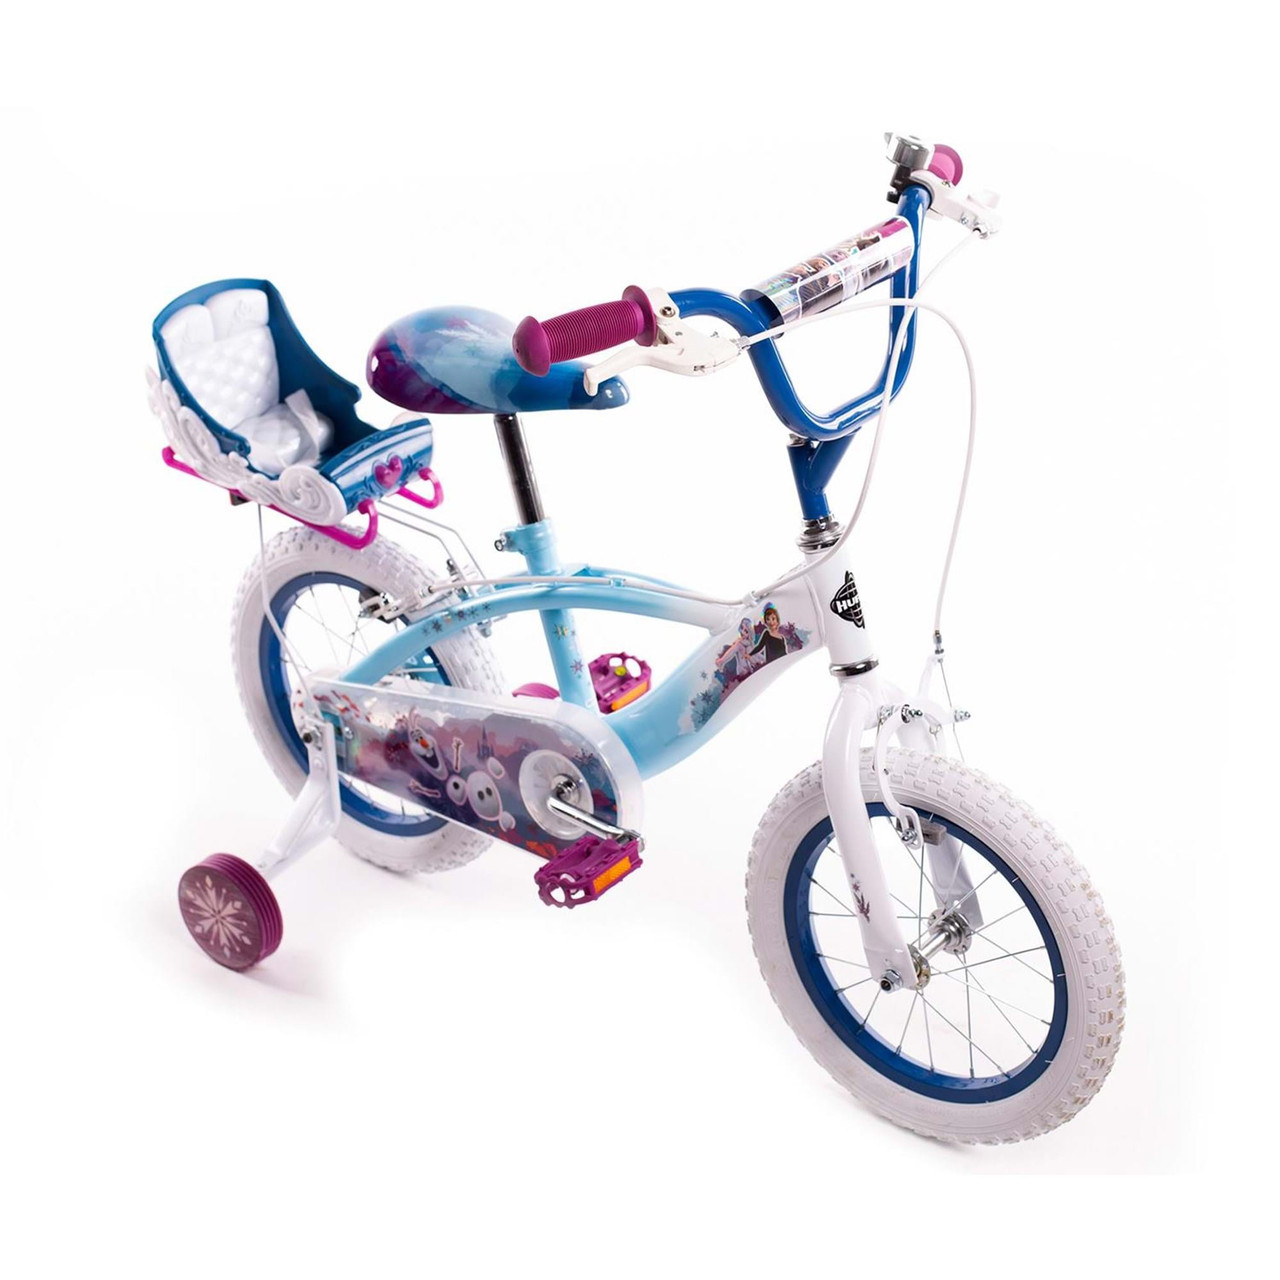 Huffy Children's Frozen Toddler 14-Inch Bike With Stabilisers For Ages 4 to 6 years old